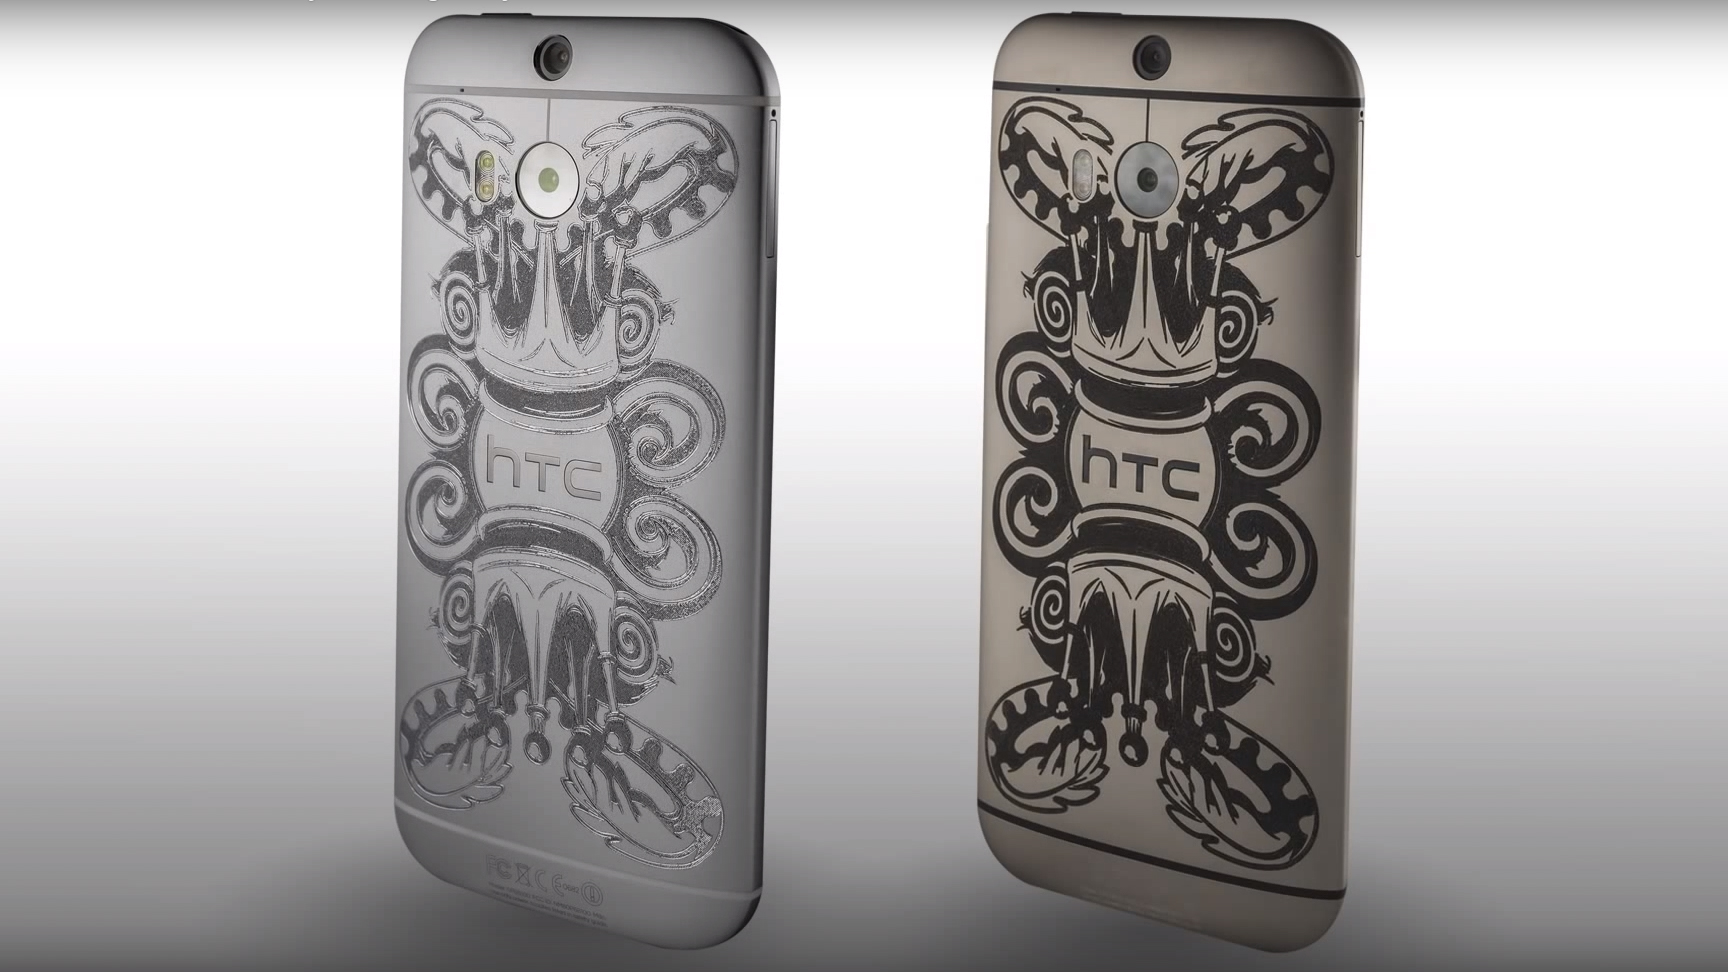 HTC M8 PHUNK Special Edition